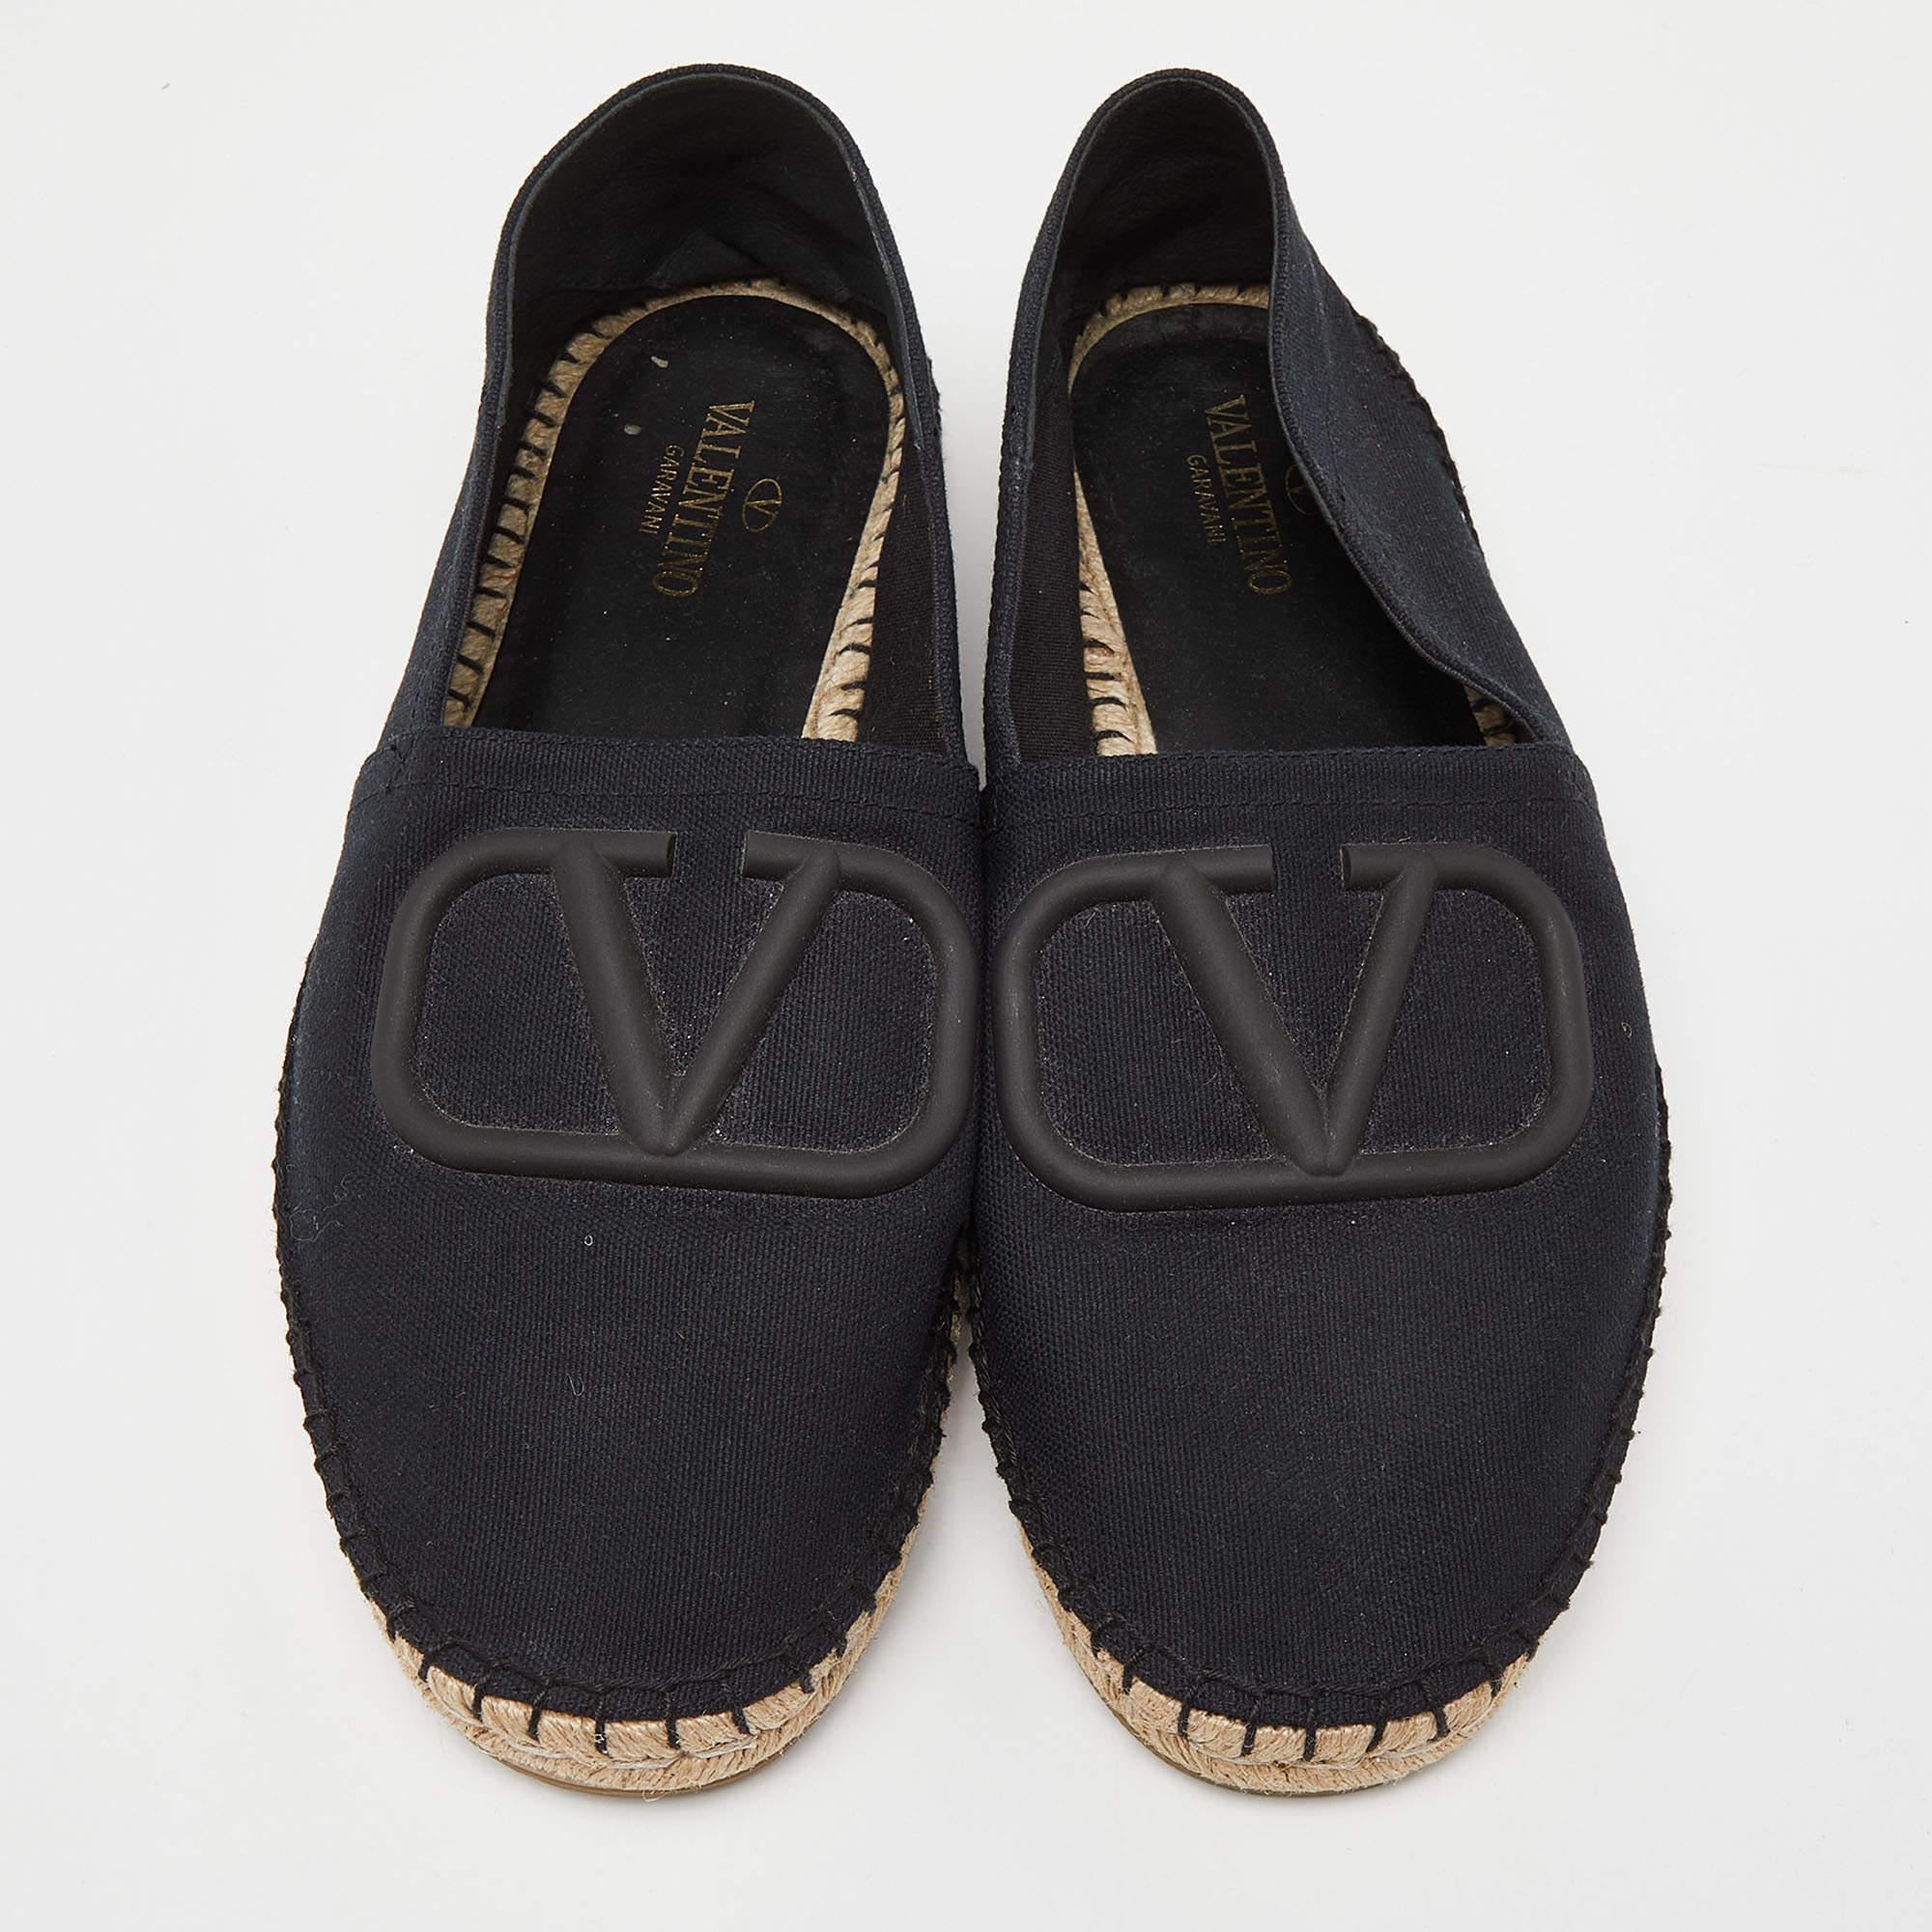 Let this comfortable pair be your first choice when you're out for a long day. These Valentino shoes have well-sewn uppers beautifully set on durable soles.

Includes: Original Dustbag

